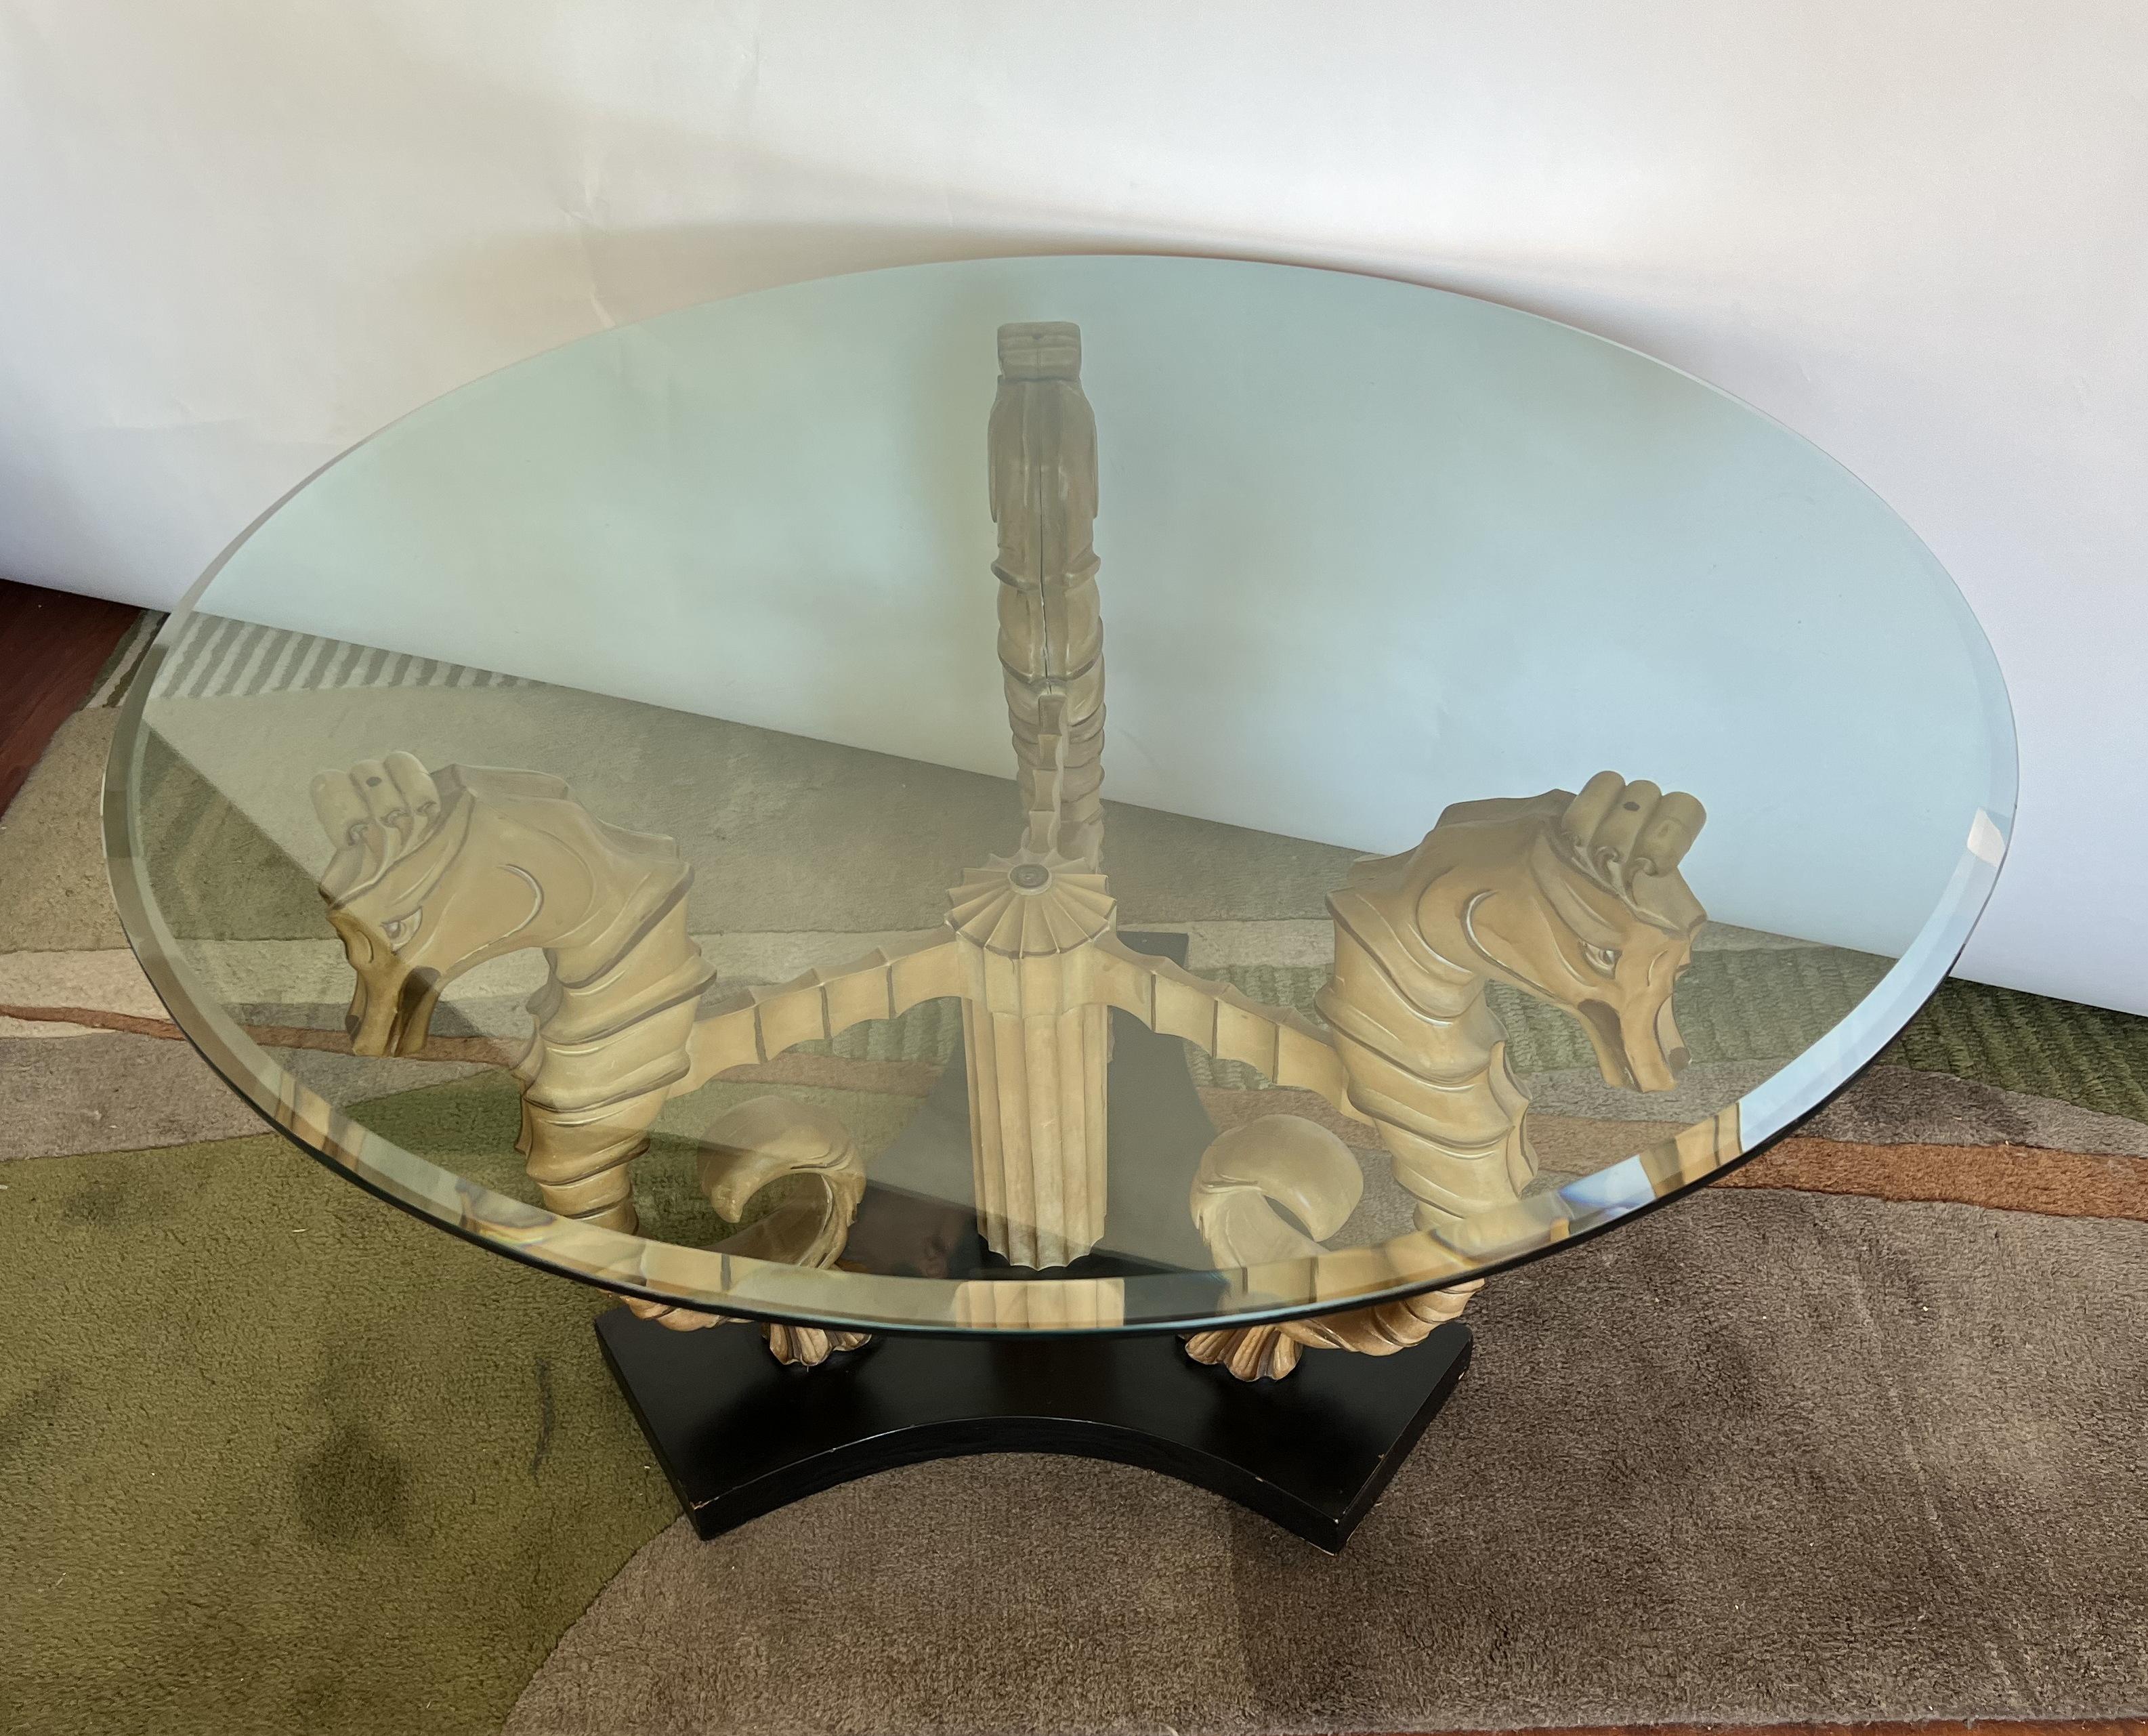 Unusual coffee table, with thick (0.5